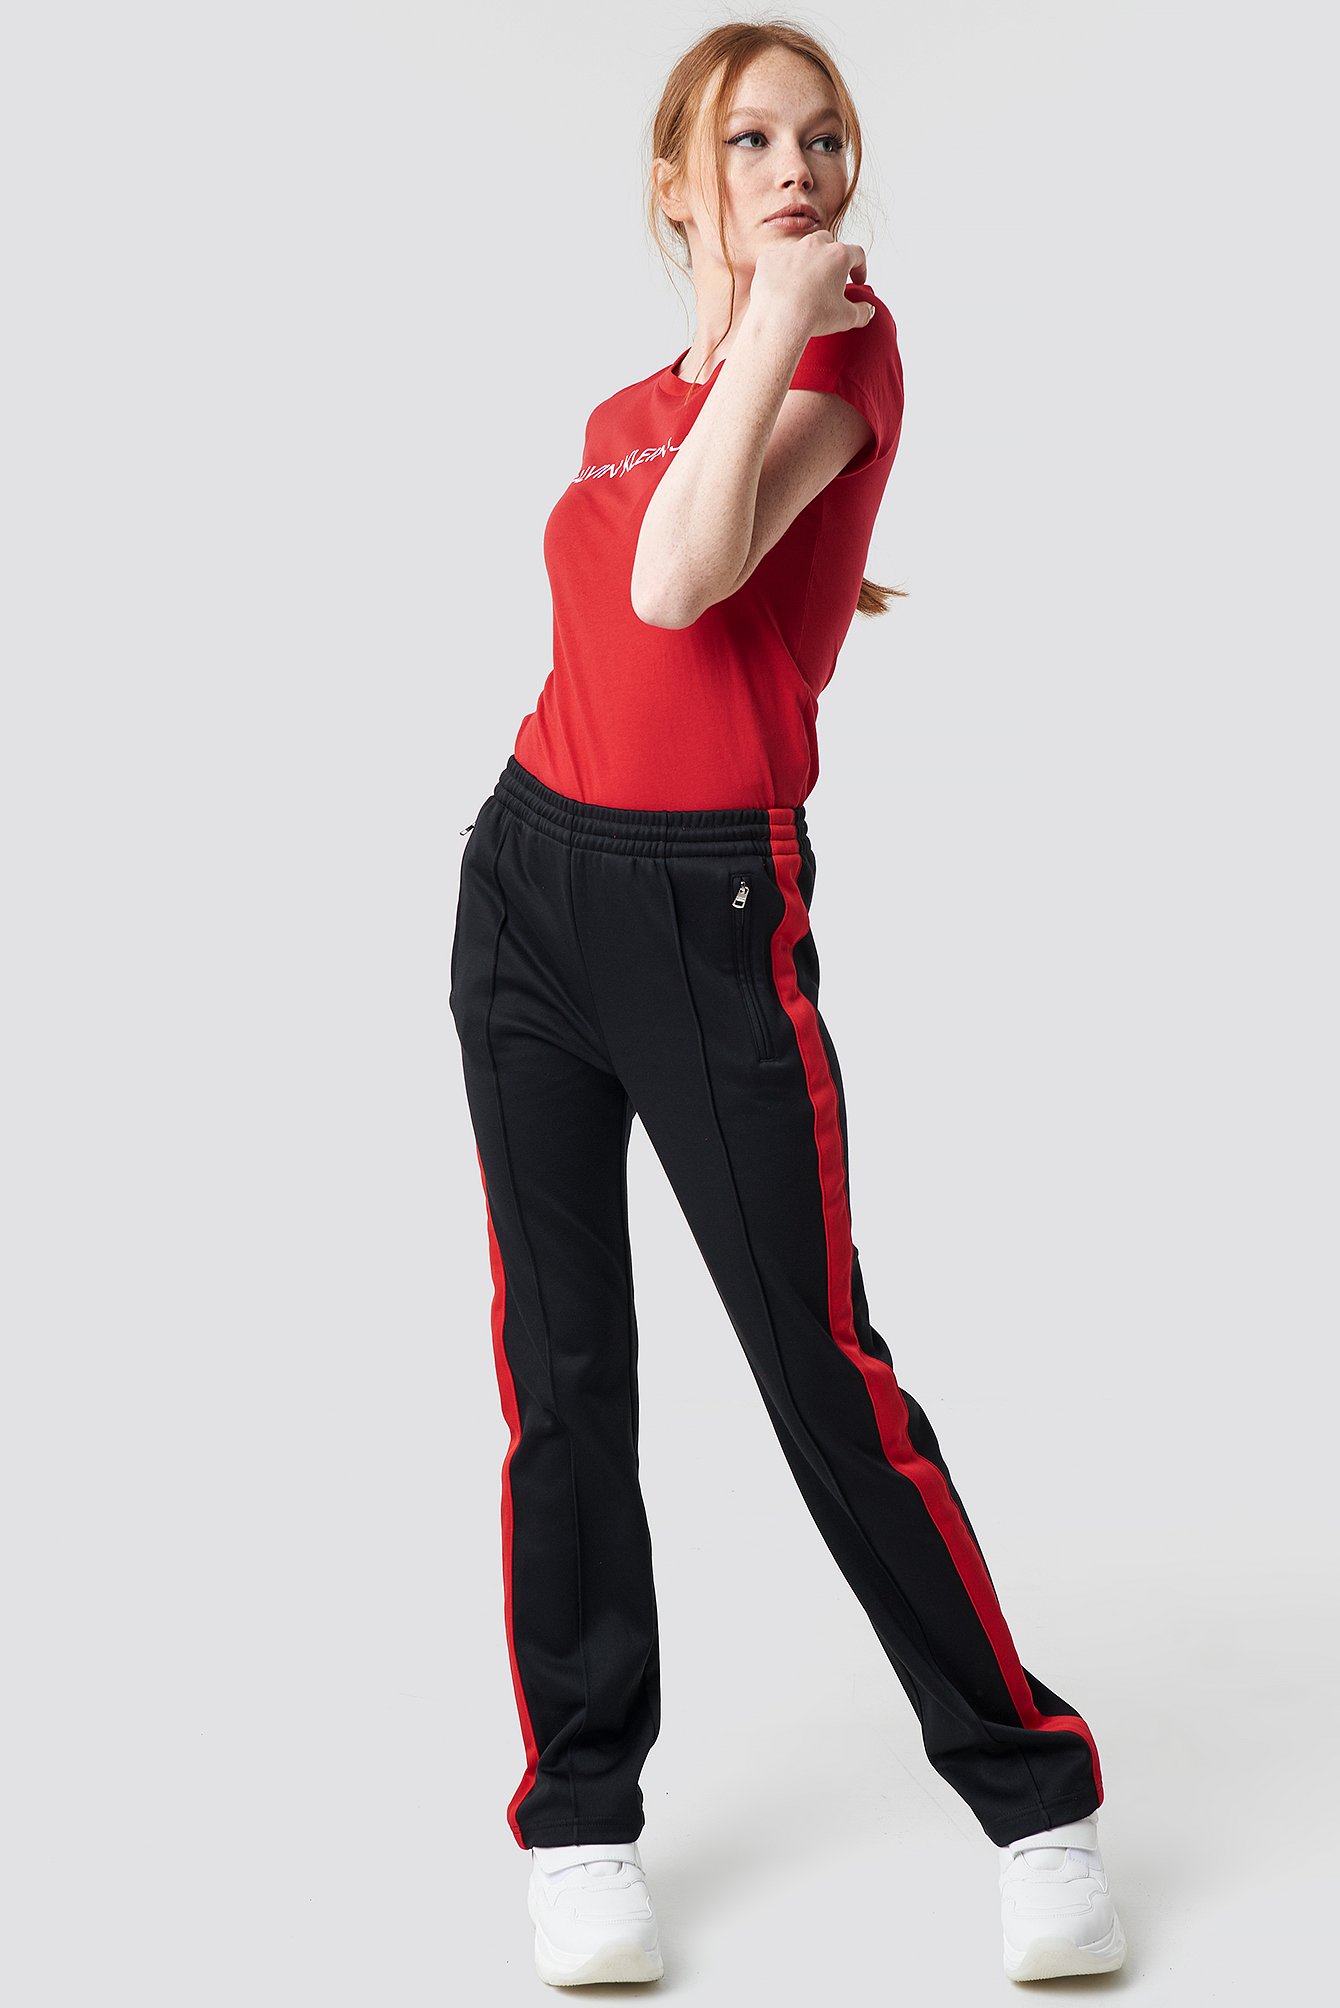 These tracksuit trousers by Calvin Klein feature a high elastic waist, side pockets, a seam detail down the front, a straight leg and a soft material.